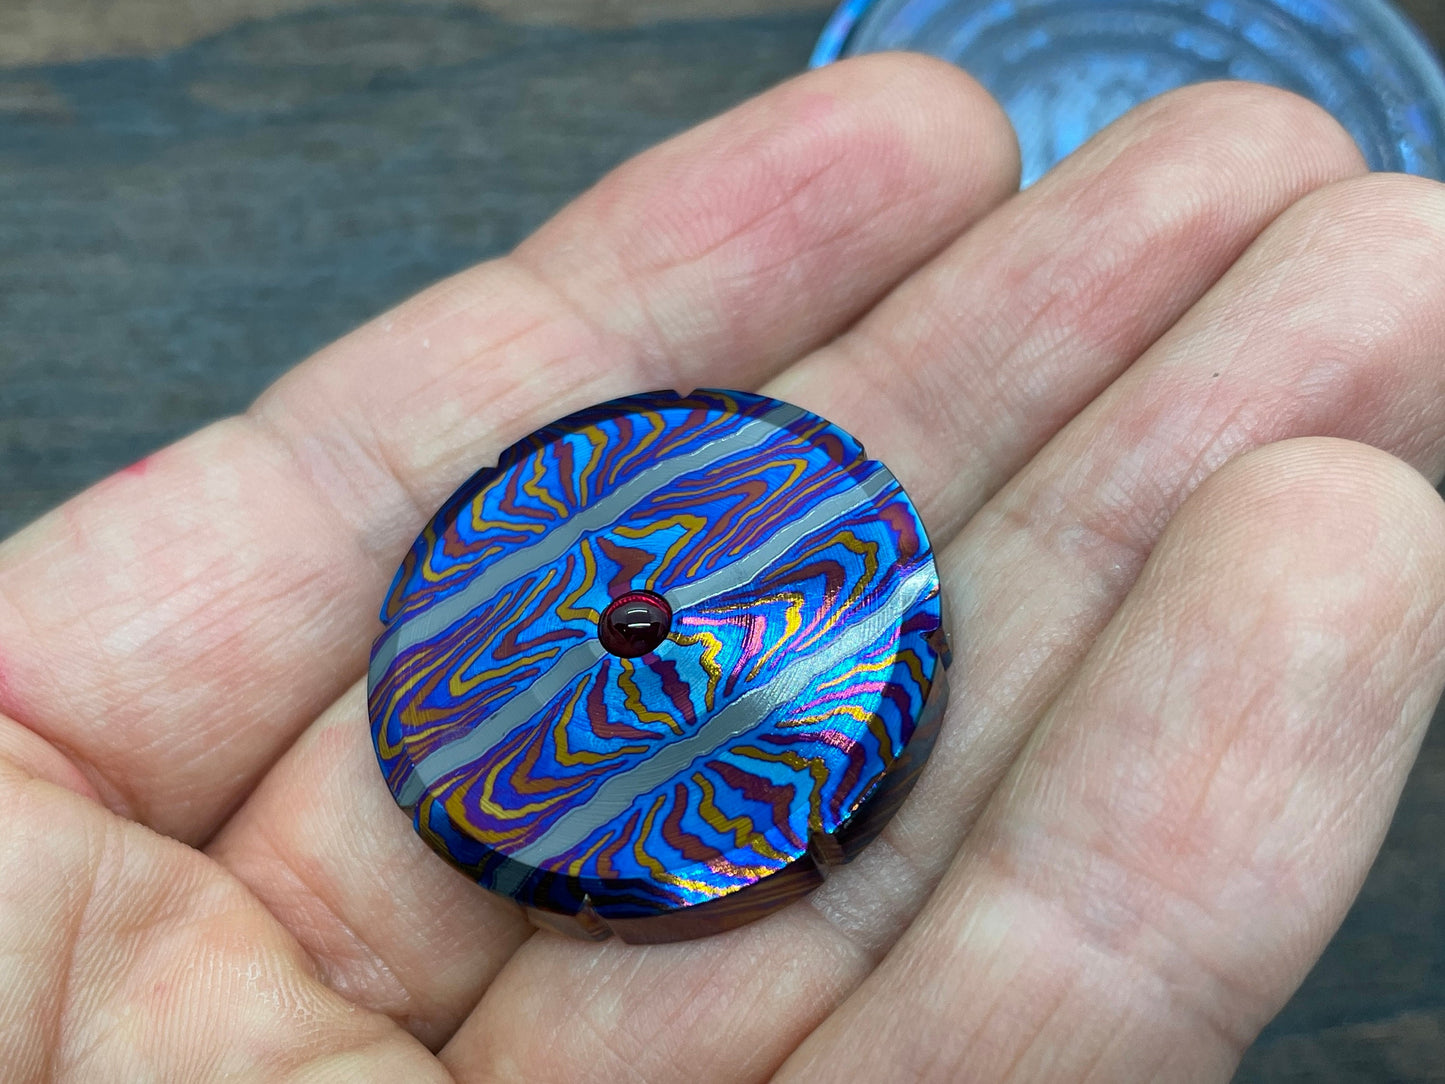 1.23in MOSAIC ZircuTi Spinning Worry Coin Black Timascus